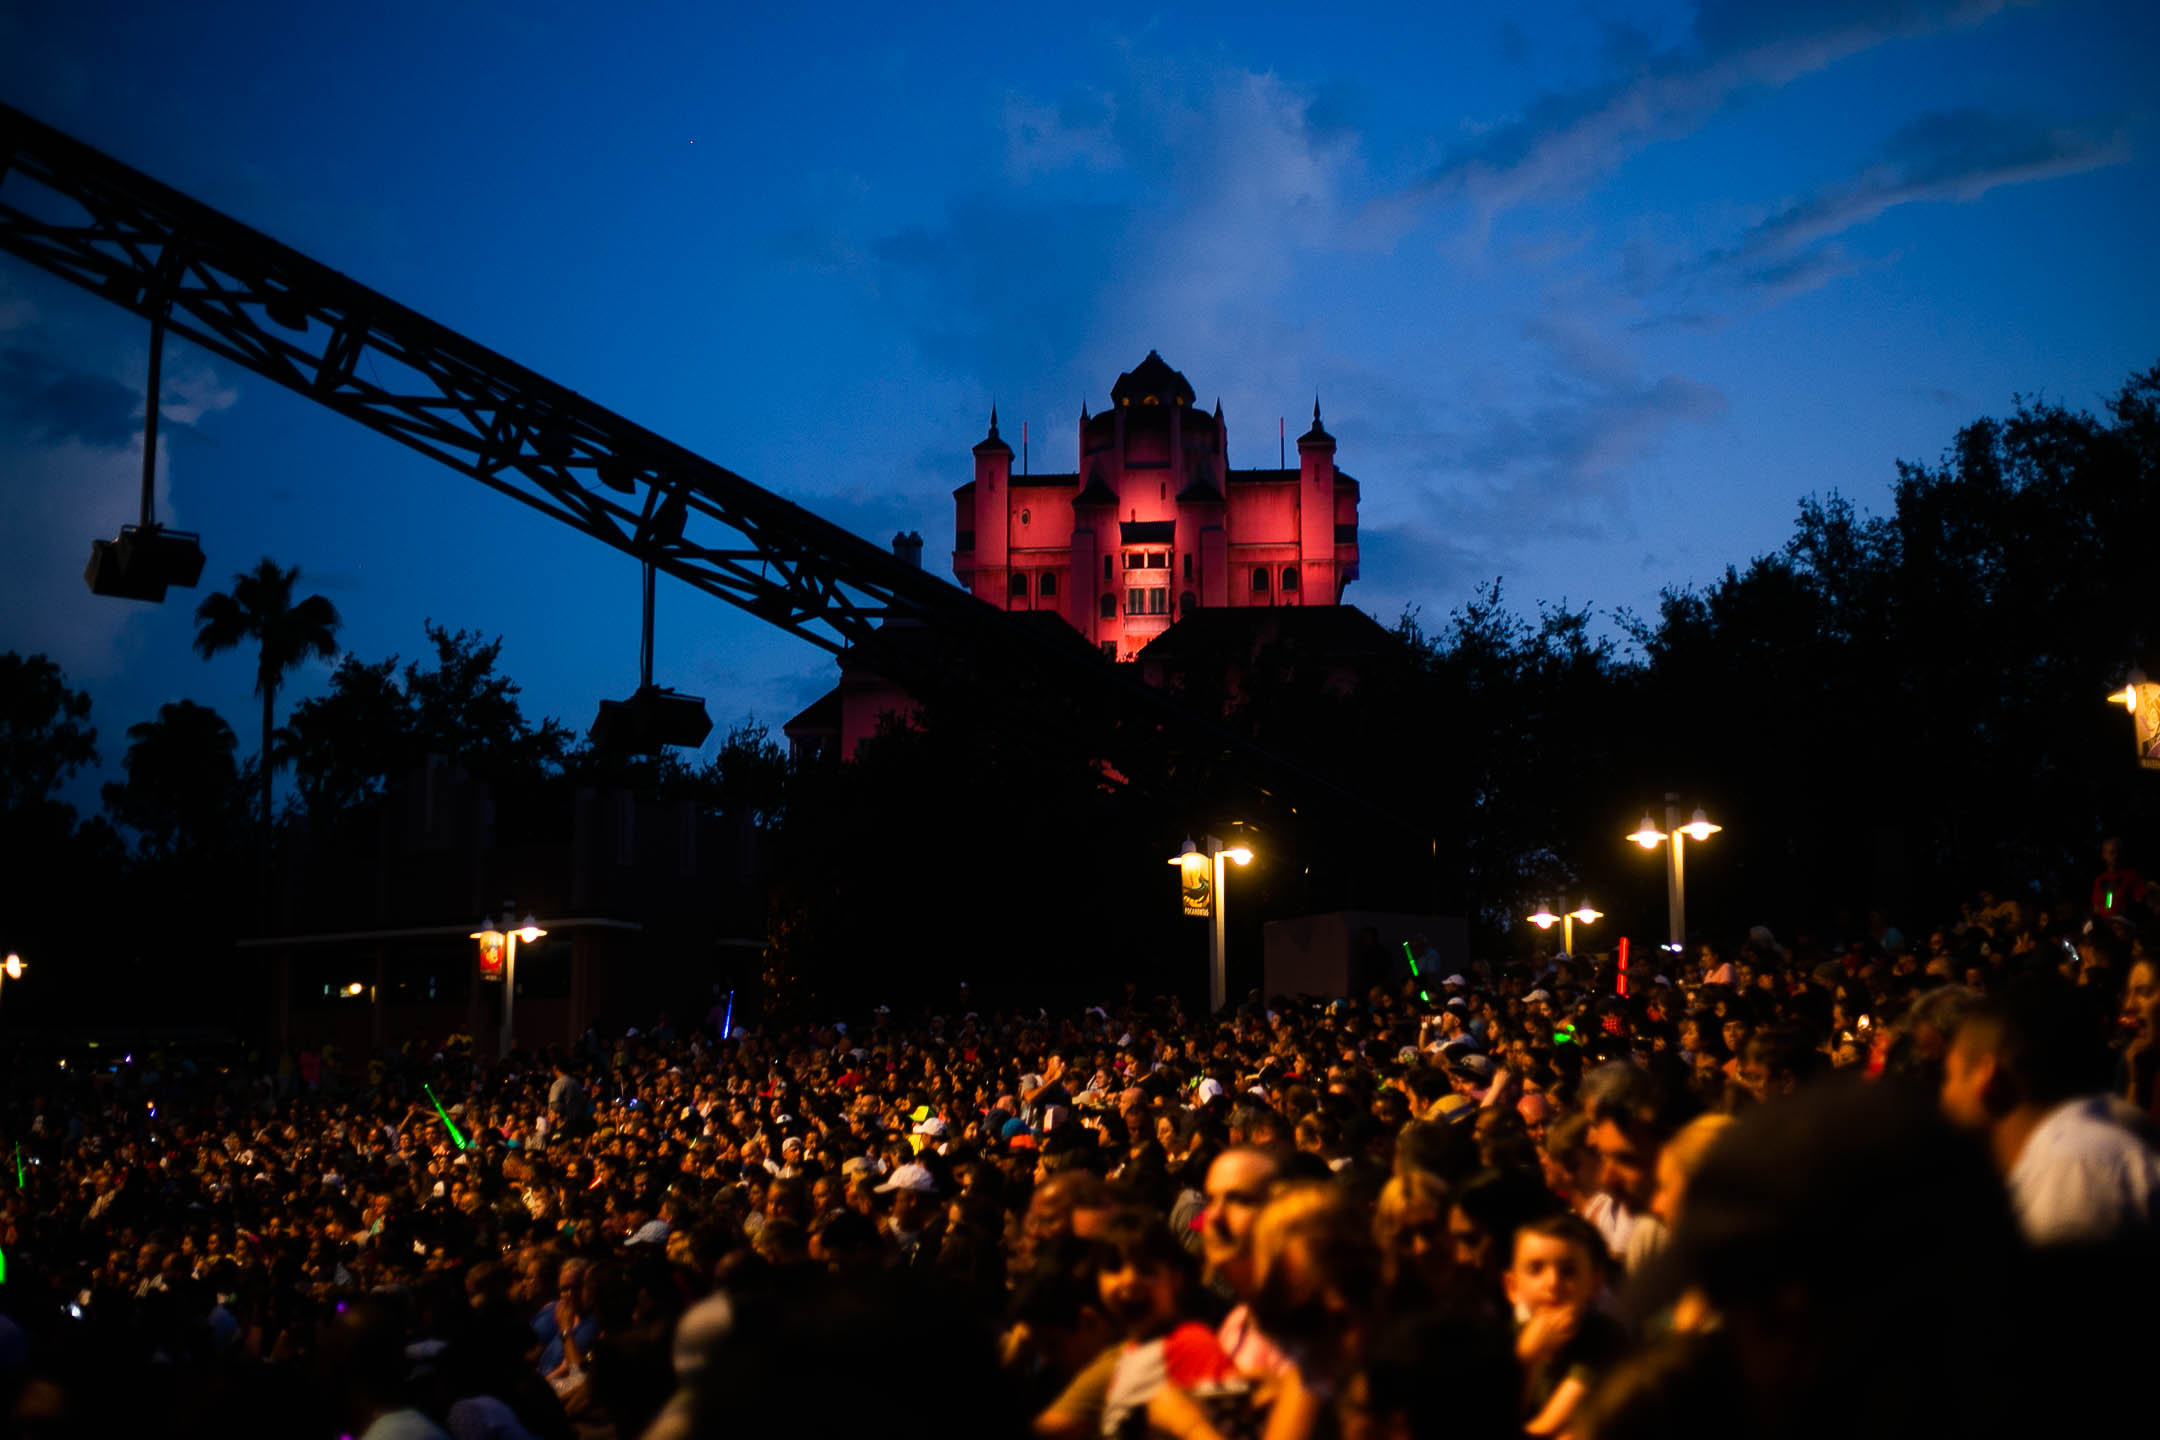 A sea of people at a concert, lit in gold by streetlights and by crane-mounted event lights above their heads. A treeline is silhouetted against the dark blue sky. On a hill above the treeline, a large building is lit in vivid red.